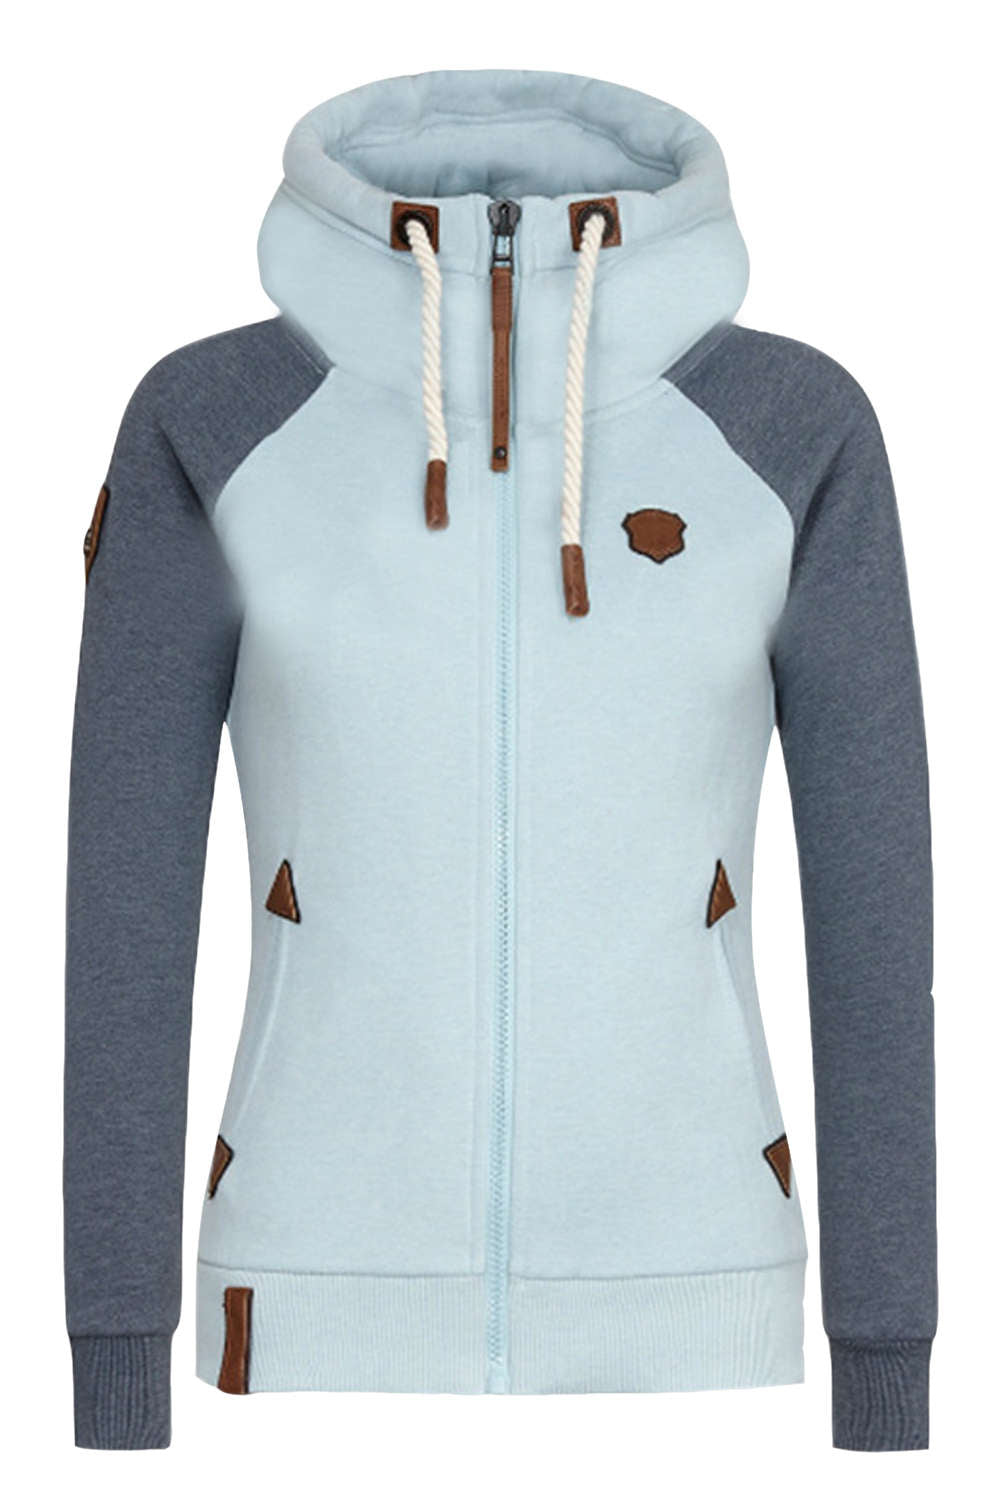 Iyasson Women's Zip Up Hoodie with Pockets